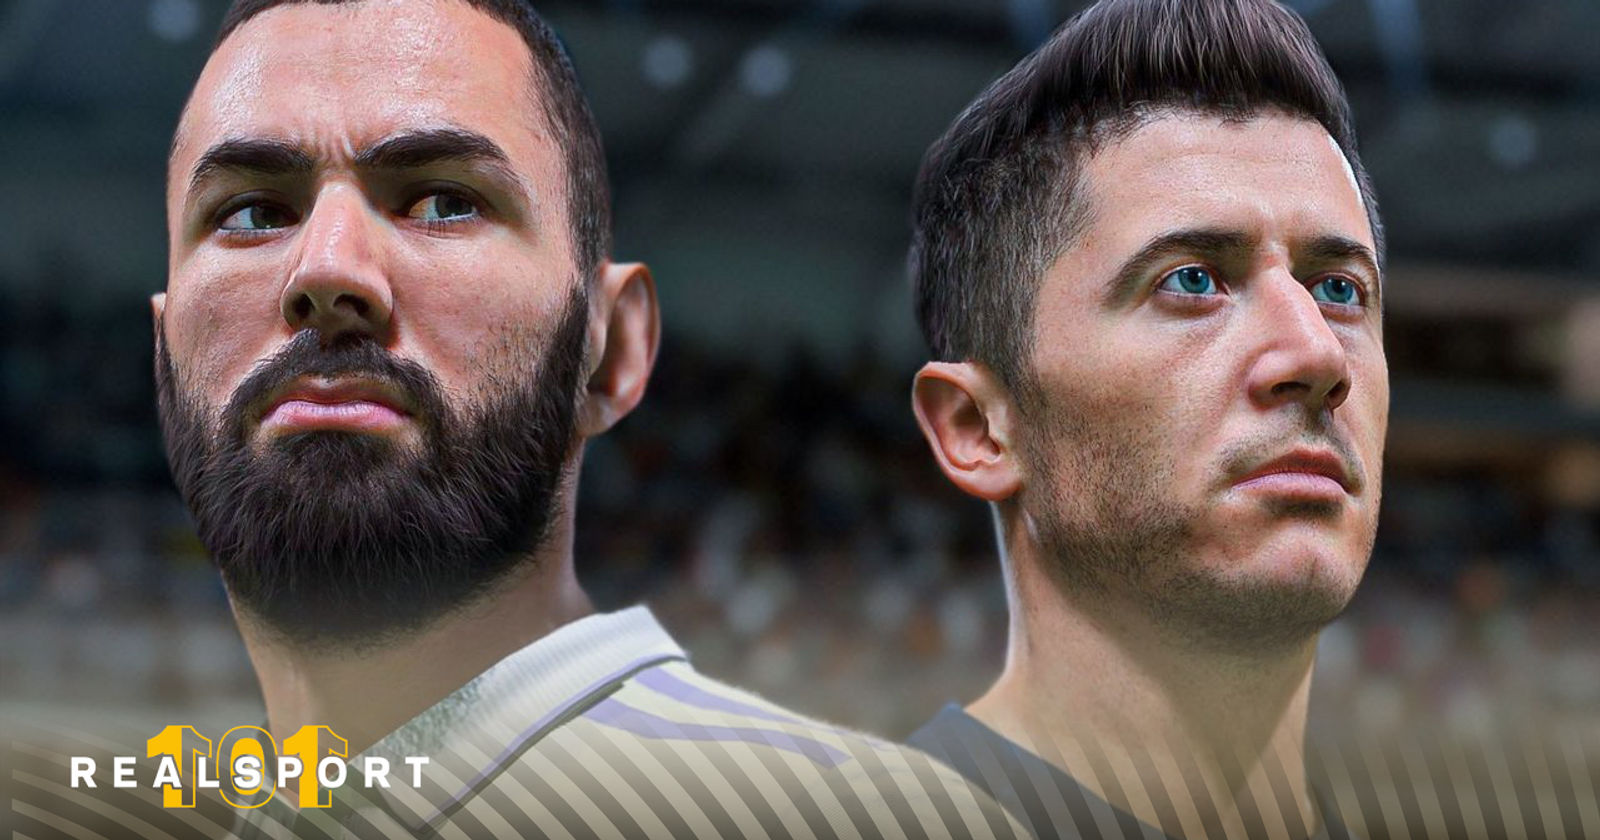 How to complete Nov. 3's Marquee Matchups SBC in FIFA 23 Ultimate Team -  Dot Esports